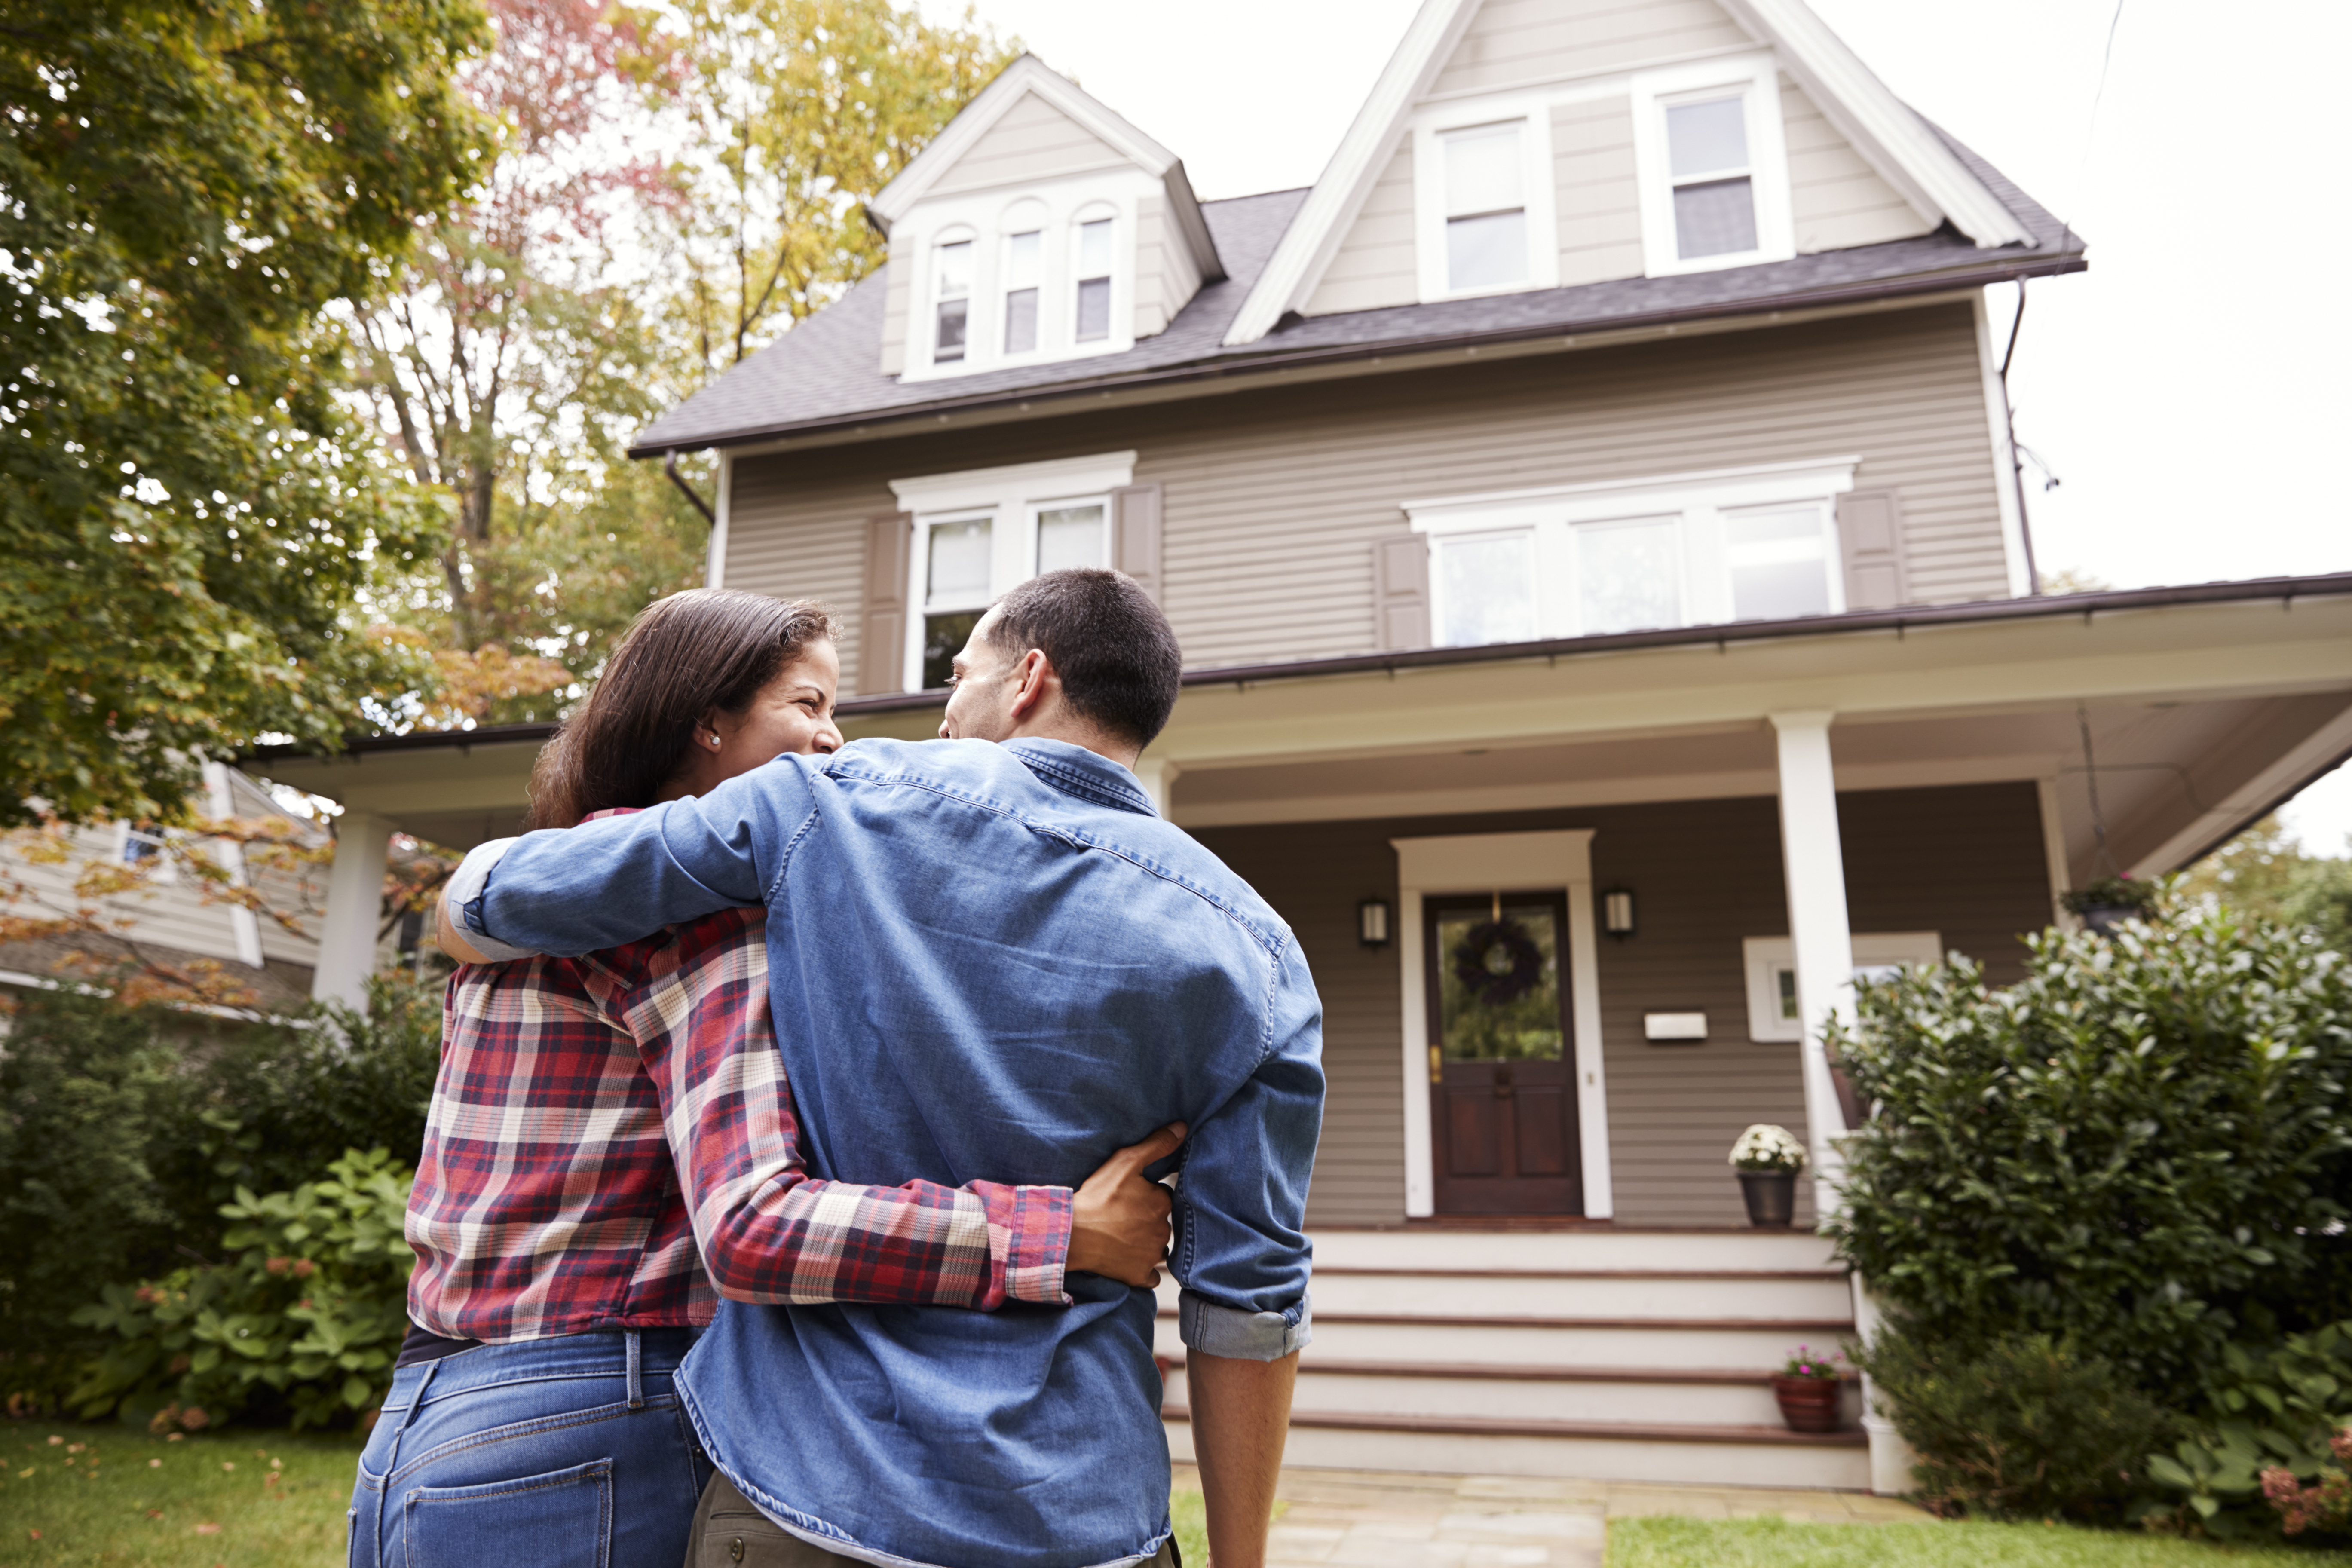 3 Reasons to Love Being a Homeowner